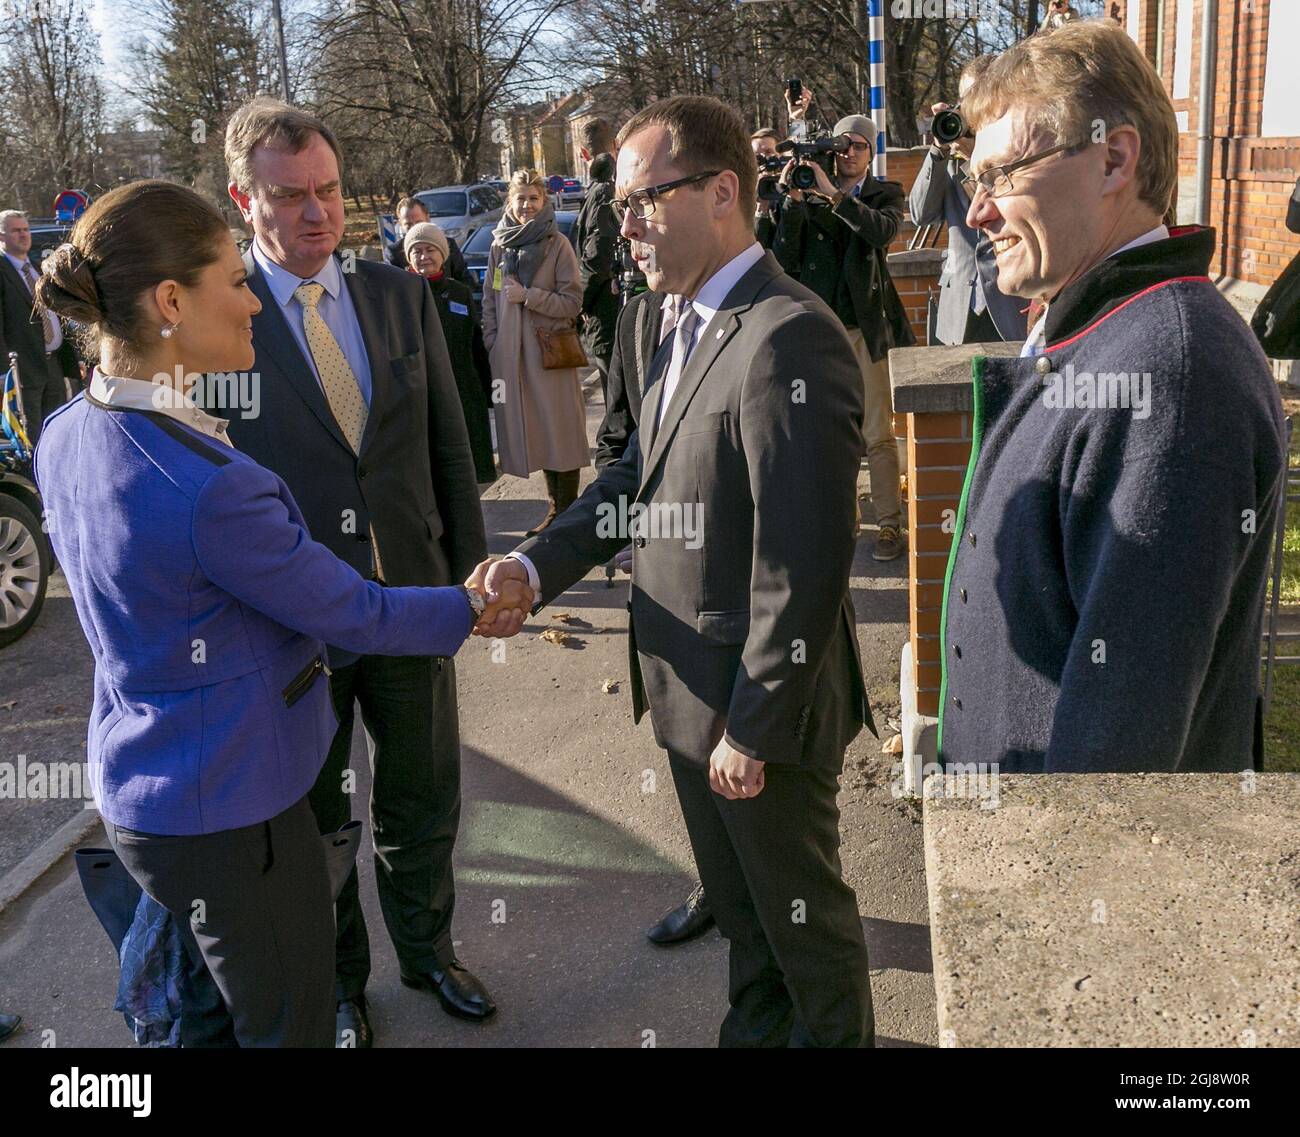 Tartu 2014-10-29 Crown Princess Victoria and Prince Daniel of Sweden are welcomed by the Mayor of Tartu Urmas Klaas to a lunch hosted by Estonian Natioanl museum and Estonian Student's Society in Tartu the second day of their official visit to Estonia October 29, 2014. Foto Karli Saul/ SCANPIX BALTICS / TT / kod 20985 ref:  Stock Photo